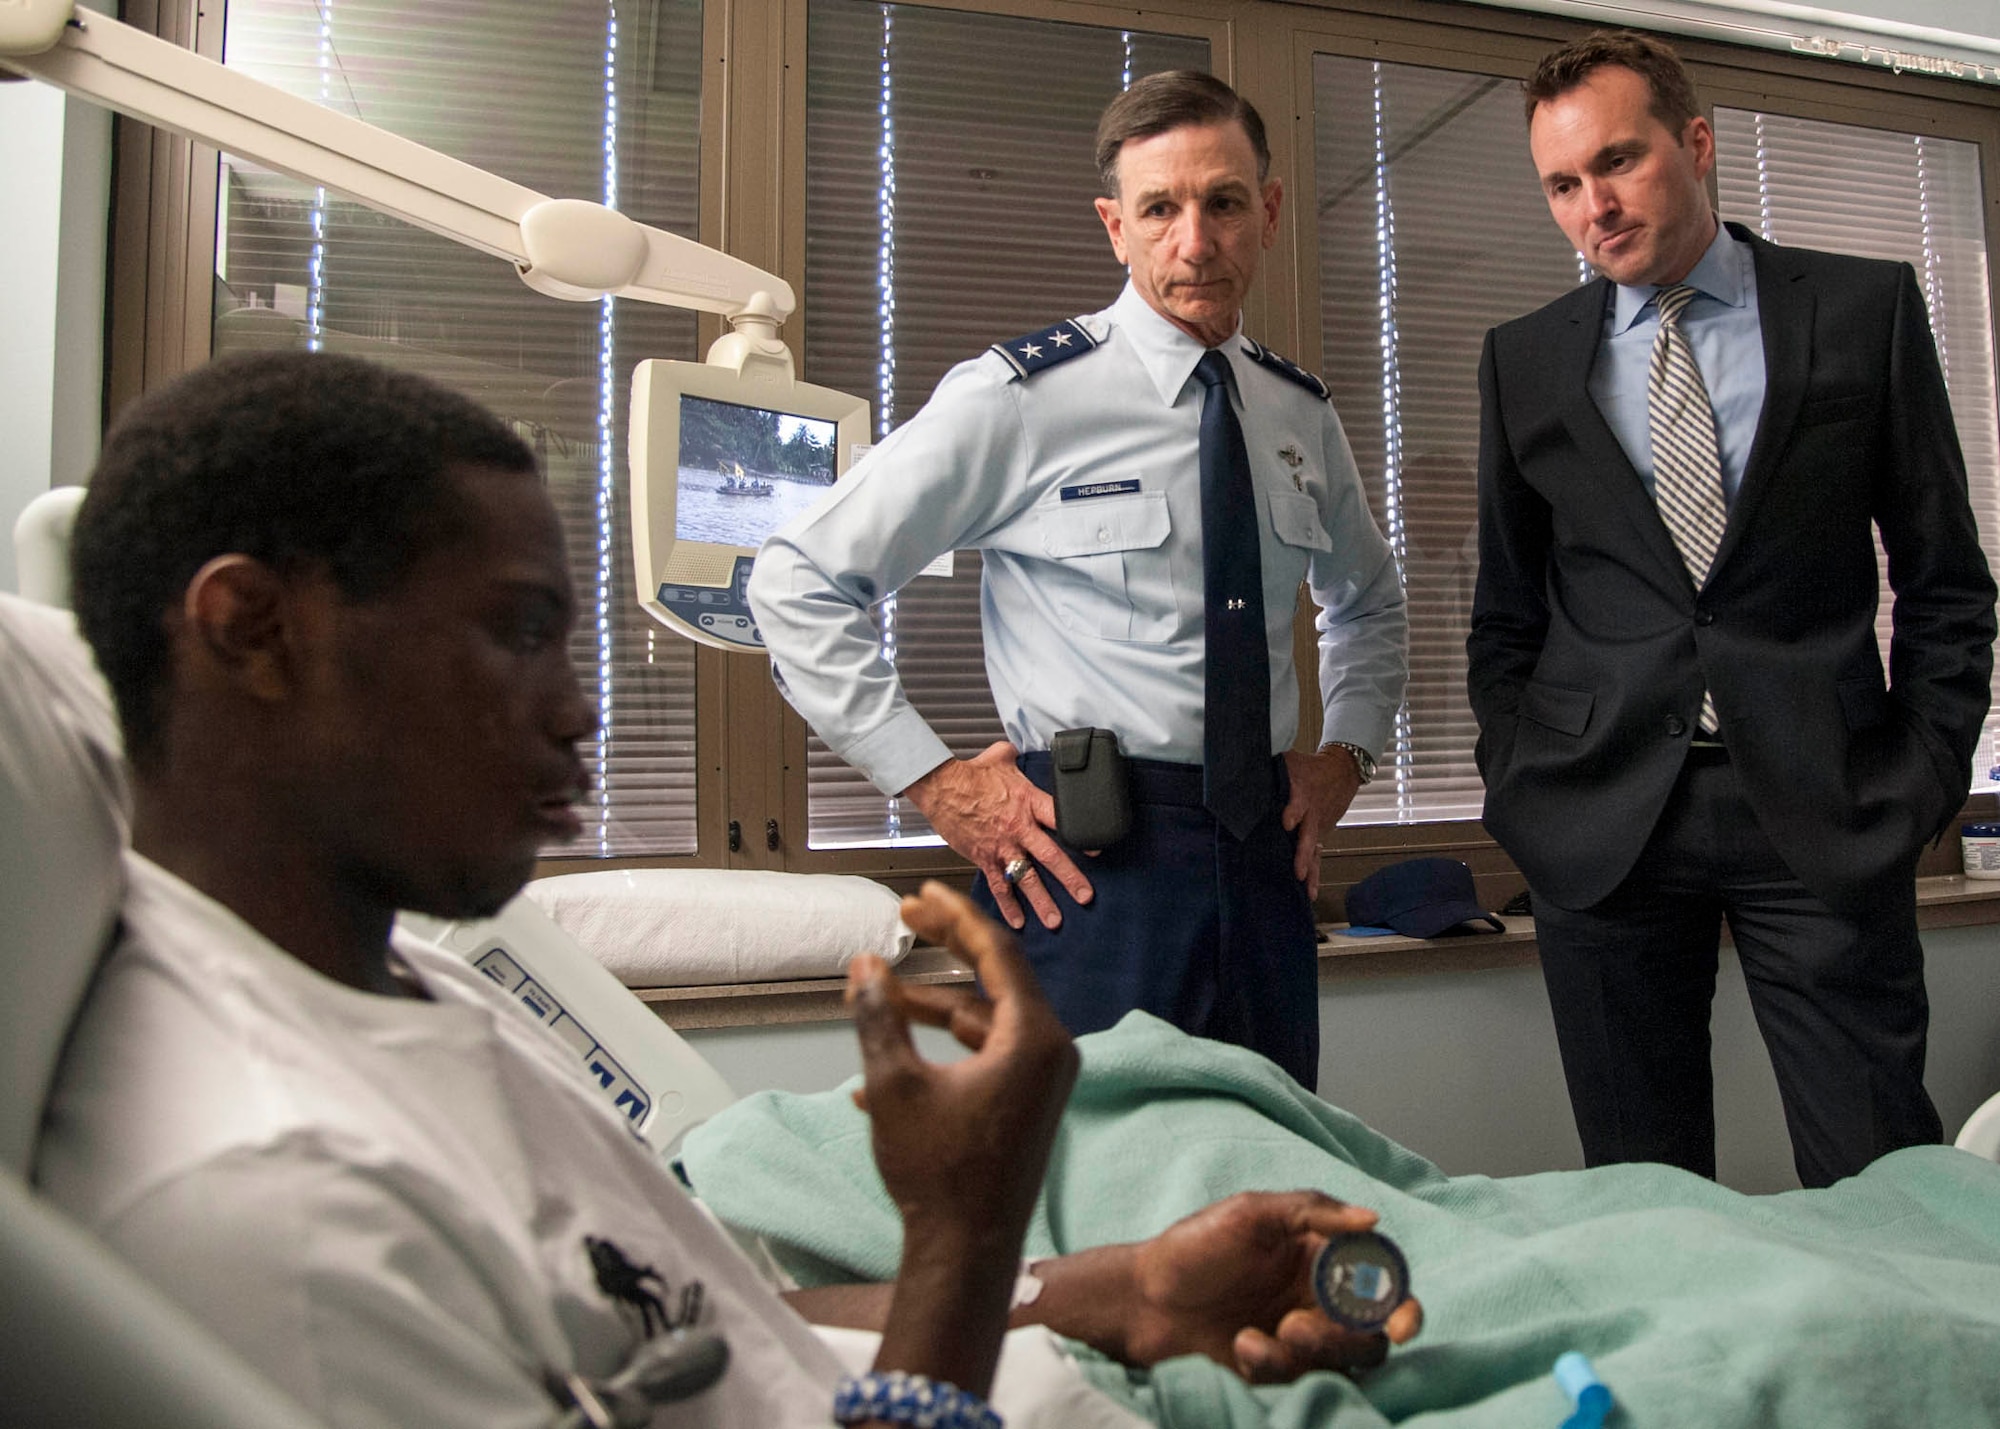 U.S. Air Force Airman 1st Class Jabrier Lee speaks about his condition with Air Force Under Secretary Eric Fanning and U.S. Air Force Maj. Gen. Byron Hepburn, 59th Medical Wing commander and director of the San Antonio Military Health System, at the San Antonio Military Medical Center on Joint Base San Antonio-Fort Sam Houston, Texas, May 16, 2013.  Lee was diagnosed with toxic epidermal necrolysis, a rare skin condition caused by a reaction to drugs, which causes the top layer of skin to detach from the lower layers all over the body. Lee is a maintenance technician assigned to the 19th Aerospace Maintenance Squadron, Little Rock Air Force Base, Ark. Fanning visited with members of JBSA May 16 and 17 with stops at JBSA-Randolph, Lackland, and Fort Sam Houston as part of his first base visit as under secretary.  (U.S. Air Force photo/Staff Sgt. Kevin Iinuma)